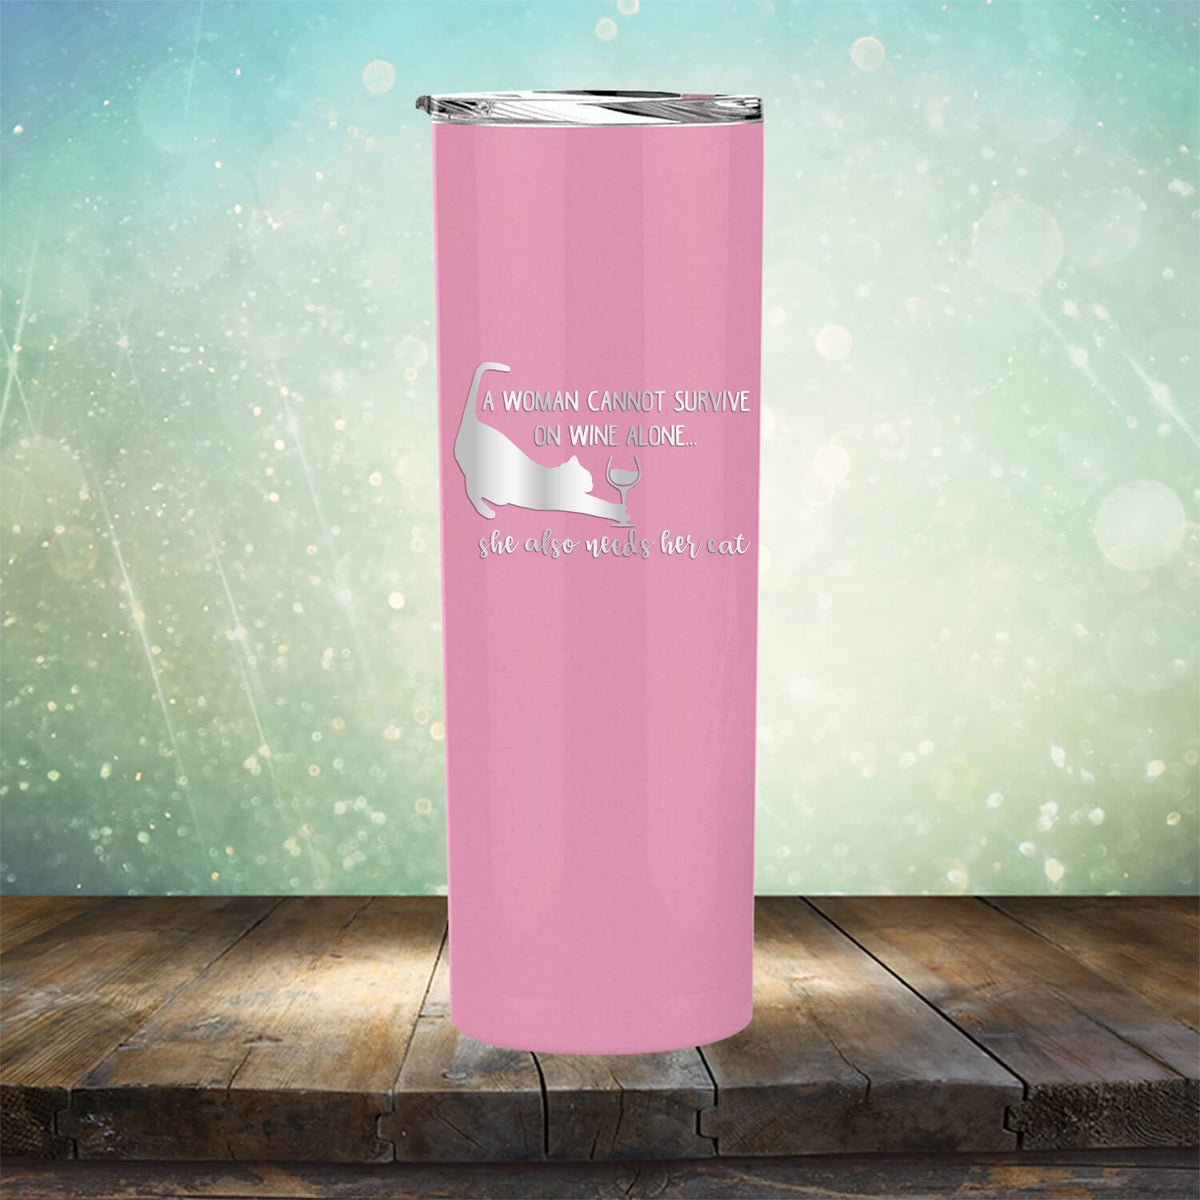 A Woman Cannot Survive on Wine Alone, She also Needs her Cat - Laser Etched Tumbler Mug